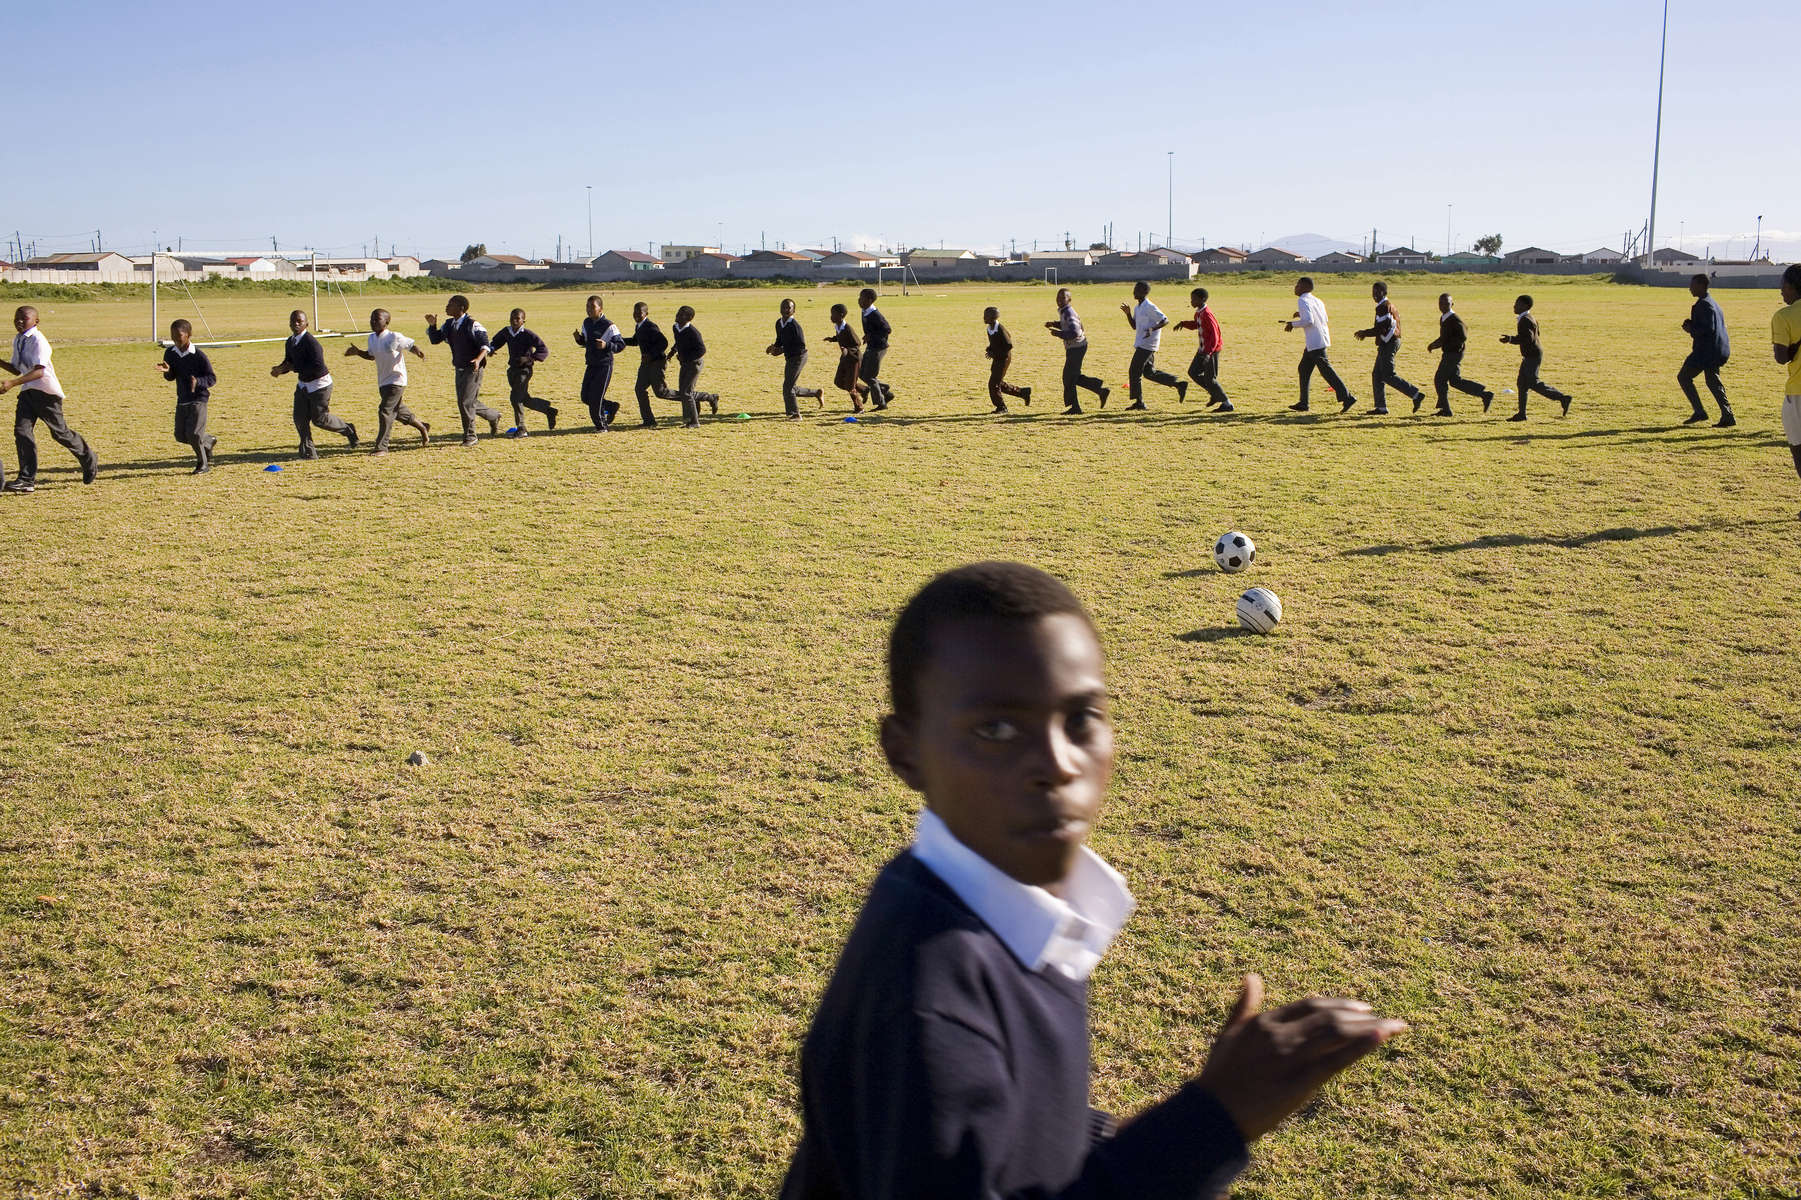 Kids on the Grassroot Soccer programme at a school in Cape Town. The idea is to develop a curriculum for HIV/AIDS education based on games. Football attracts kids and the the message from the game can easily be transferred to life.In disaster areas, war zones and urban wastelands, football keeps humanity alive. It brings nations together and promotes unity. It encourages equality and generates pride and self-belief. It has the power to heal and to help, to motivate, to give freedom to dreams and empower a generation. There are millions of people playing the game or helping it to flourish who find that football brings a positive dimension to their lives.Away from the billionaire owned clubs with it's multi-million dollar players, Football's Hidden Story is a series of emotive human interest photographs showing the positive impact football has had at grassroot level on individuals and communities all around the world. 